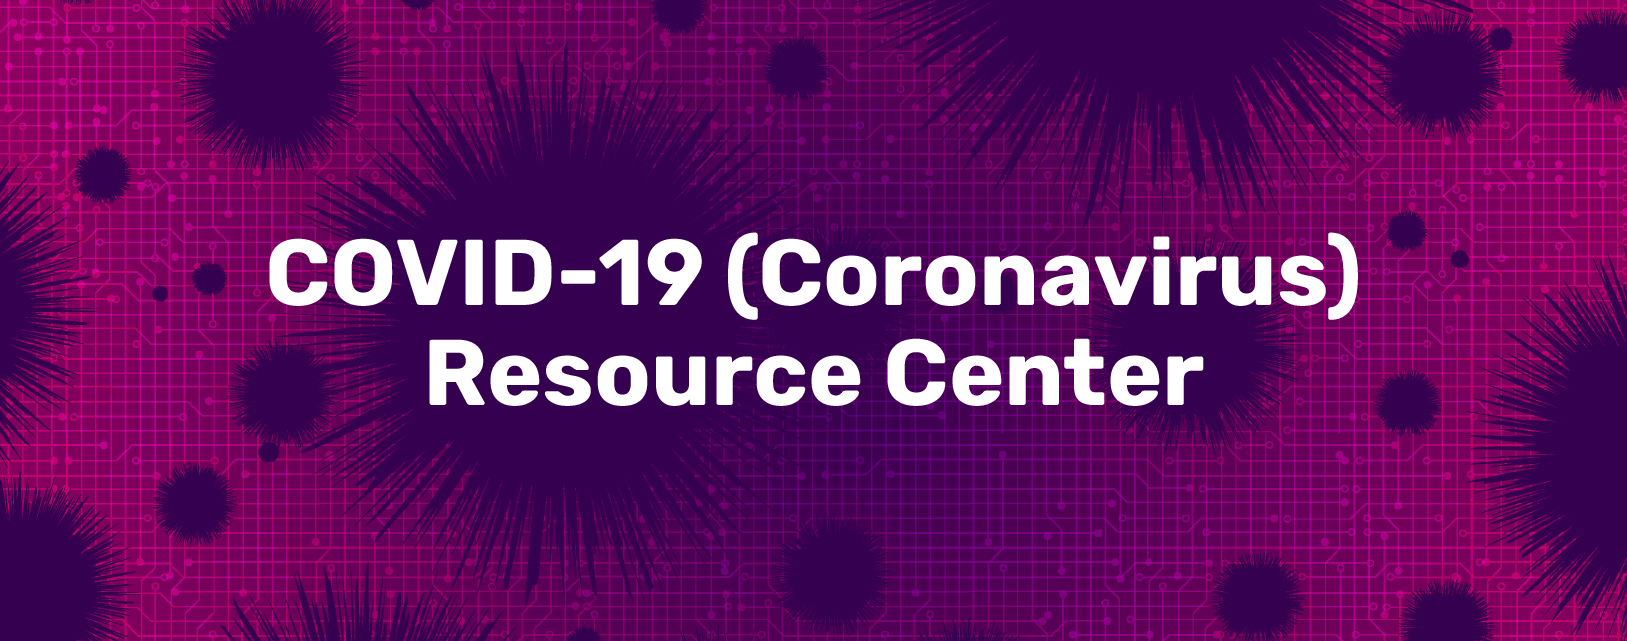 Mobile image of COVID-19 Resource Center